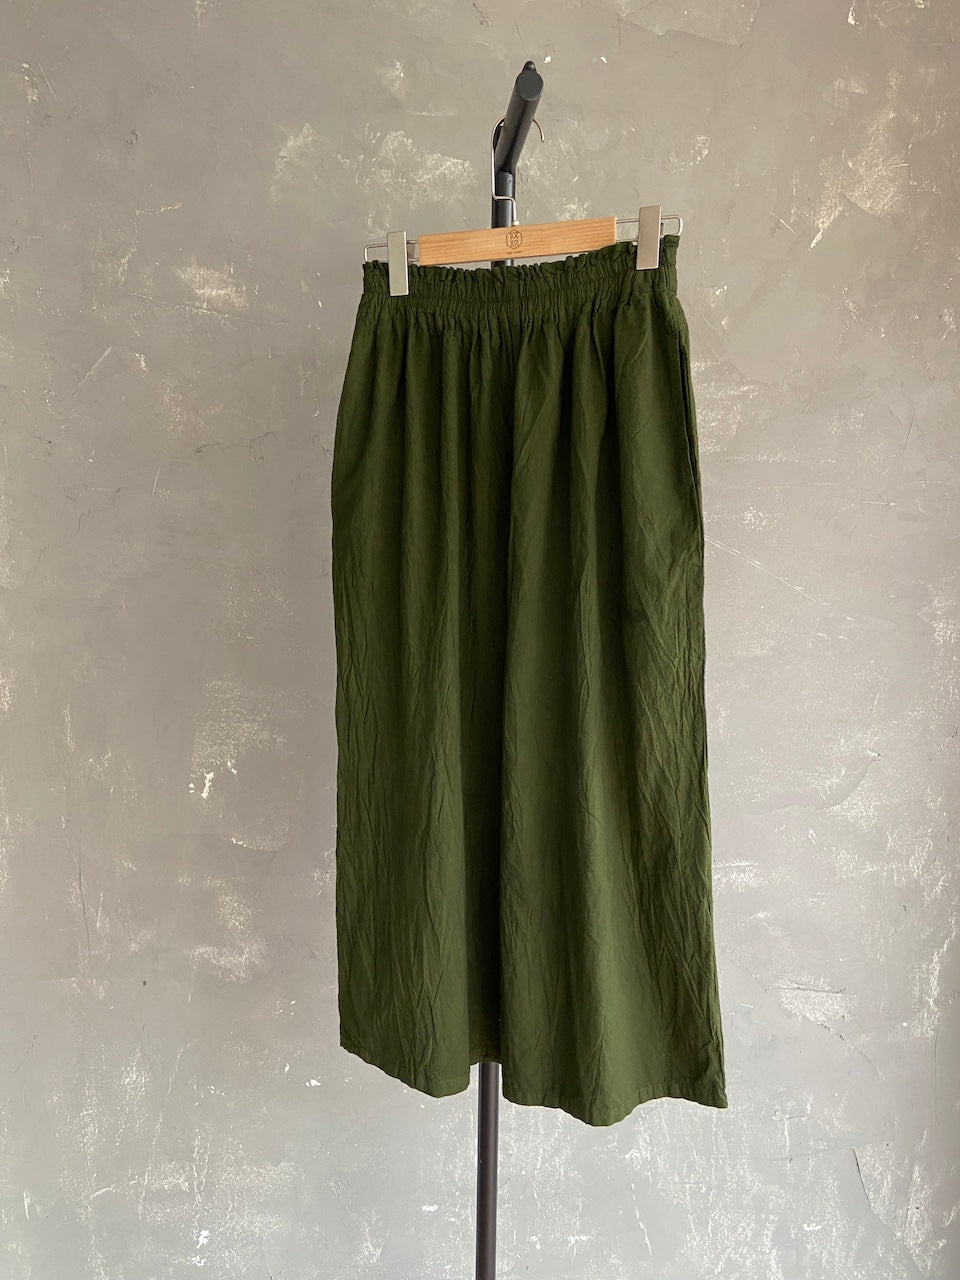 Hand Dyed Farmer's Pants in Deep Green